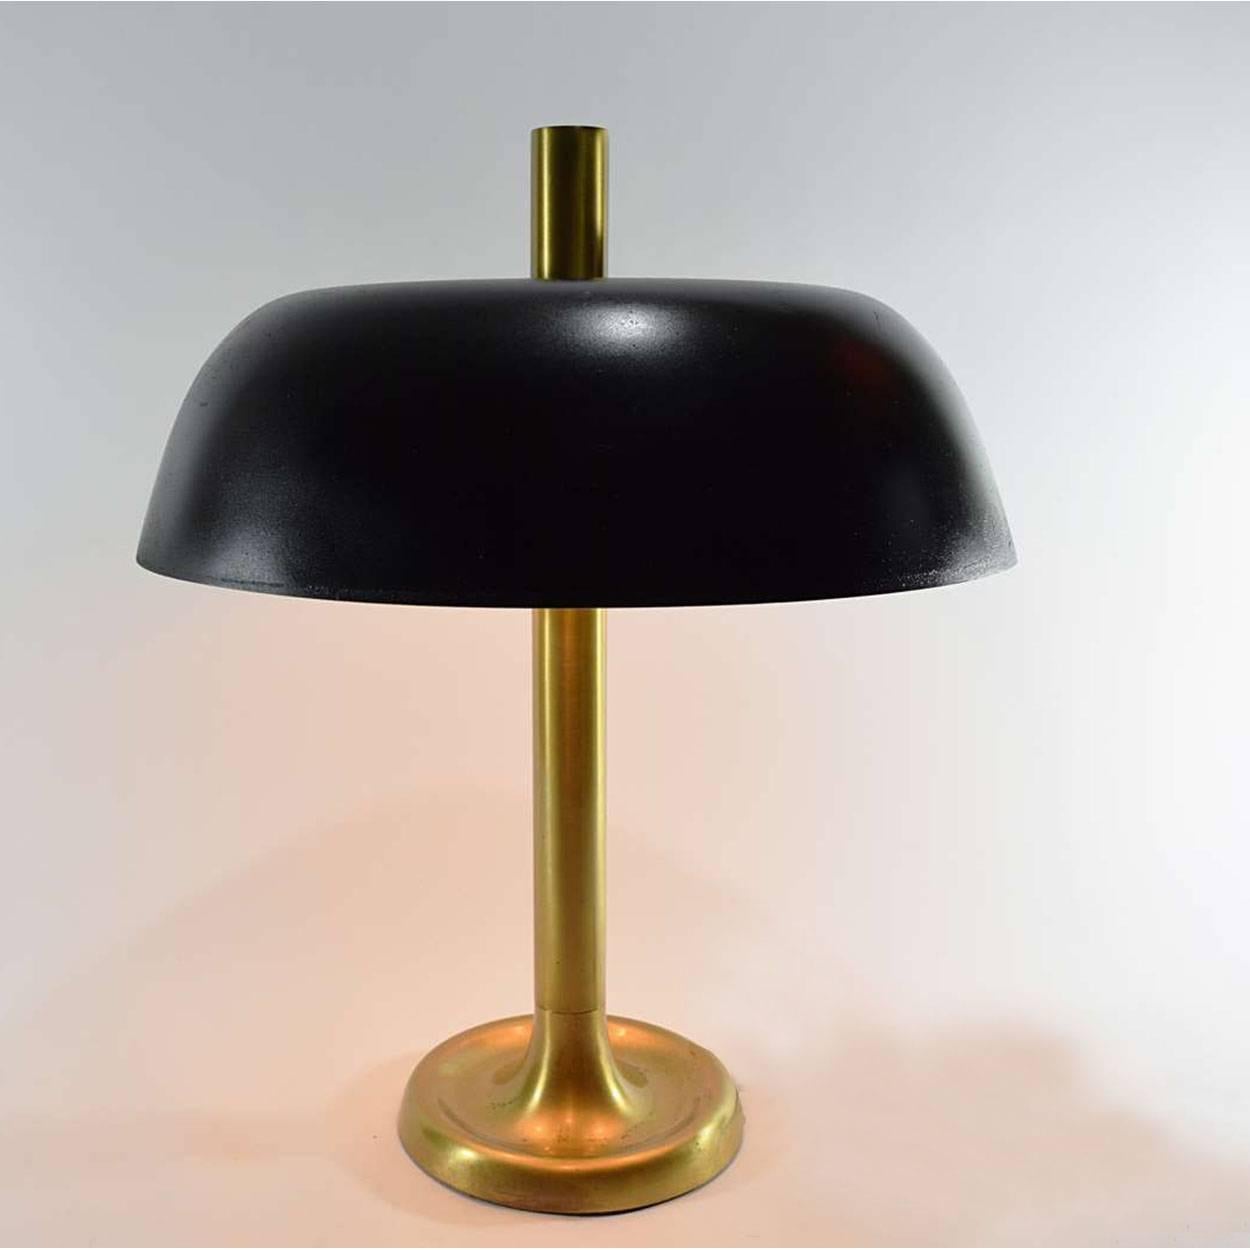 20th Century Pair of Hillebrand Brass Table Lamps with Black Shade, Germany, 1960s